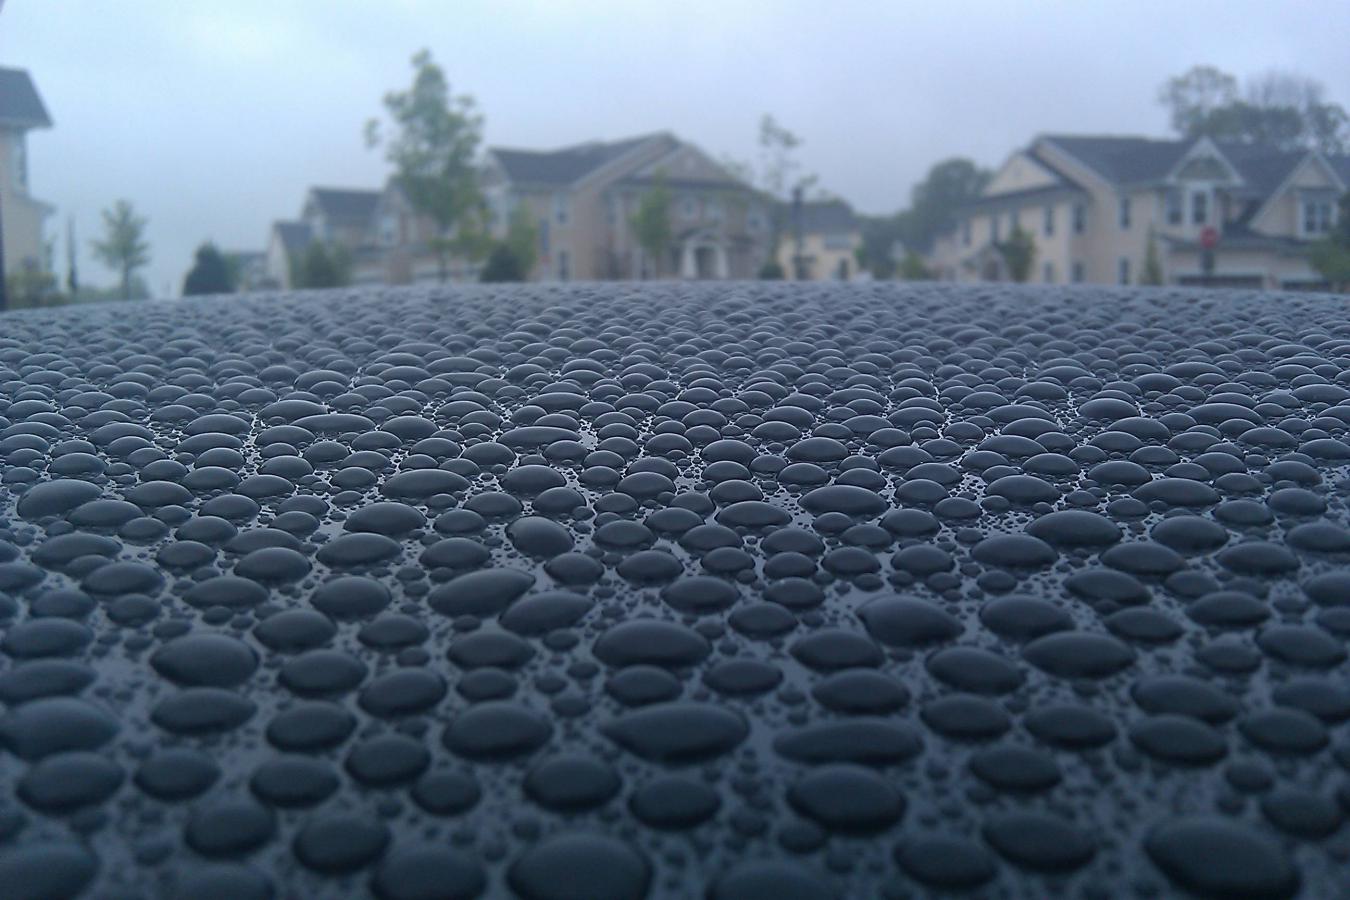 Surface tension - surface tension of water on top of a car